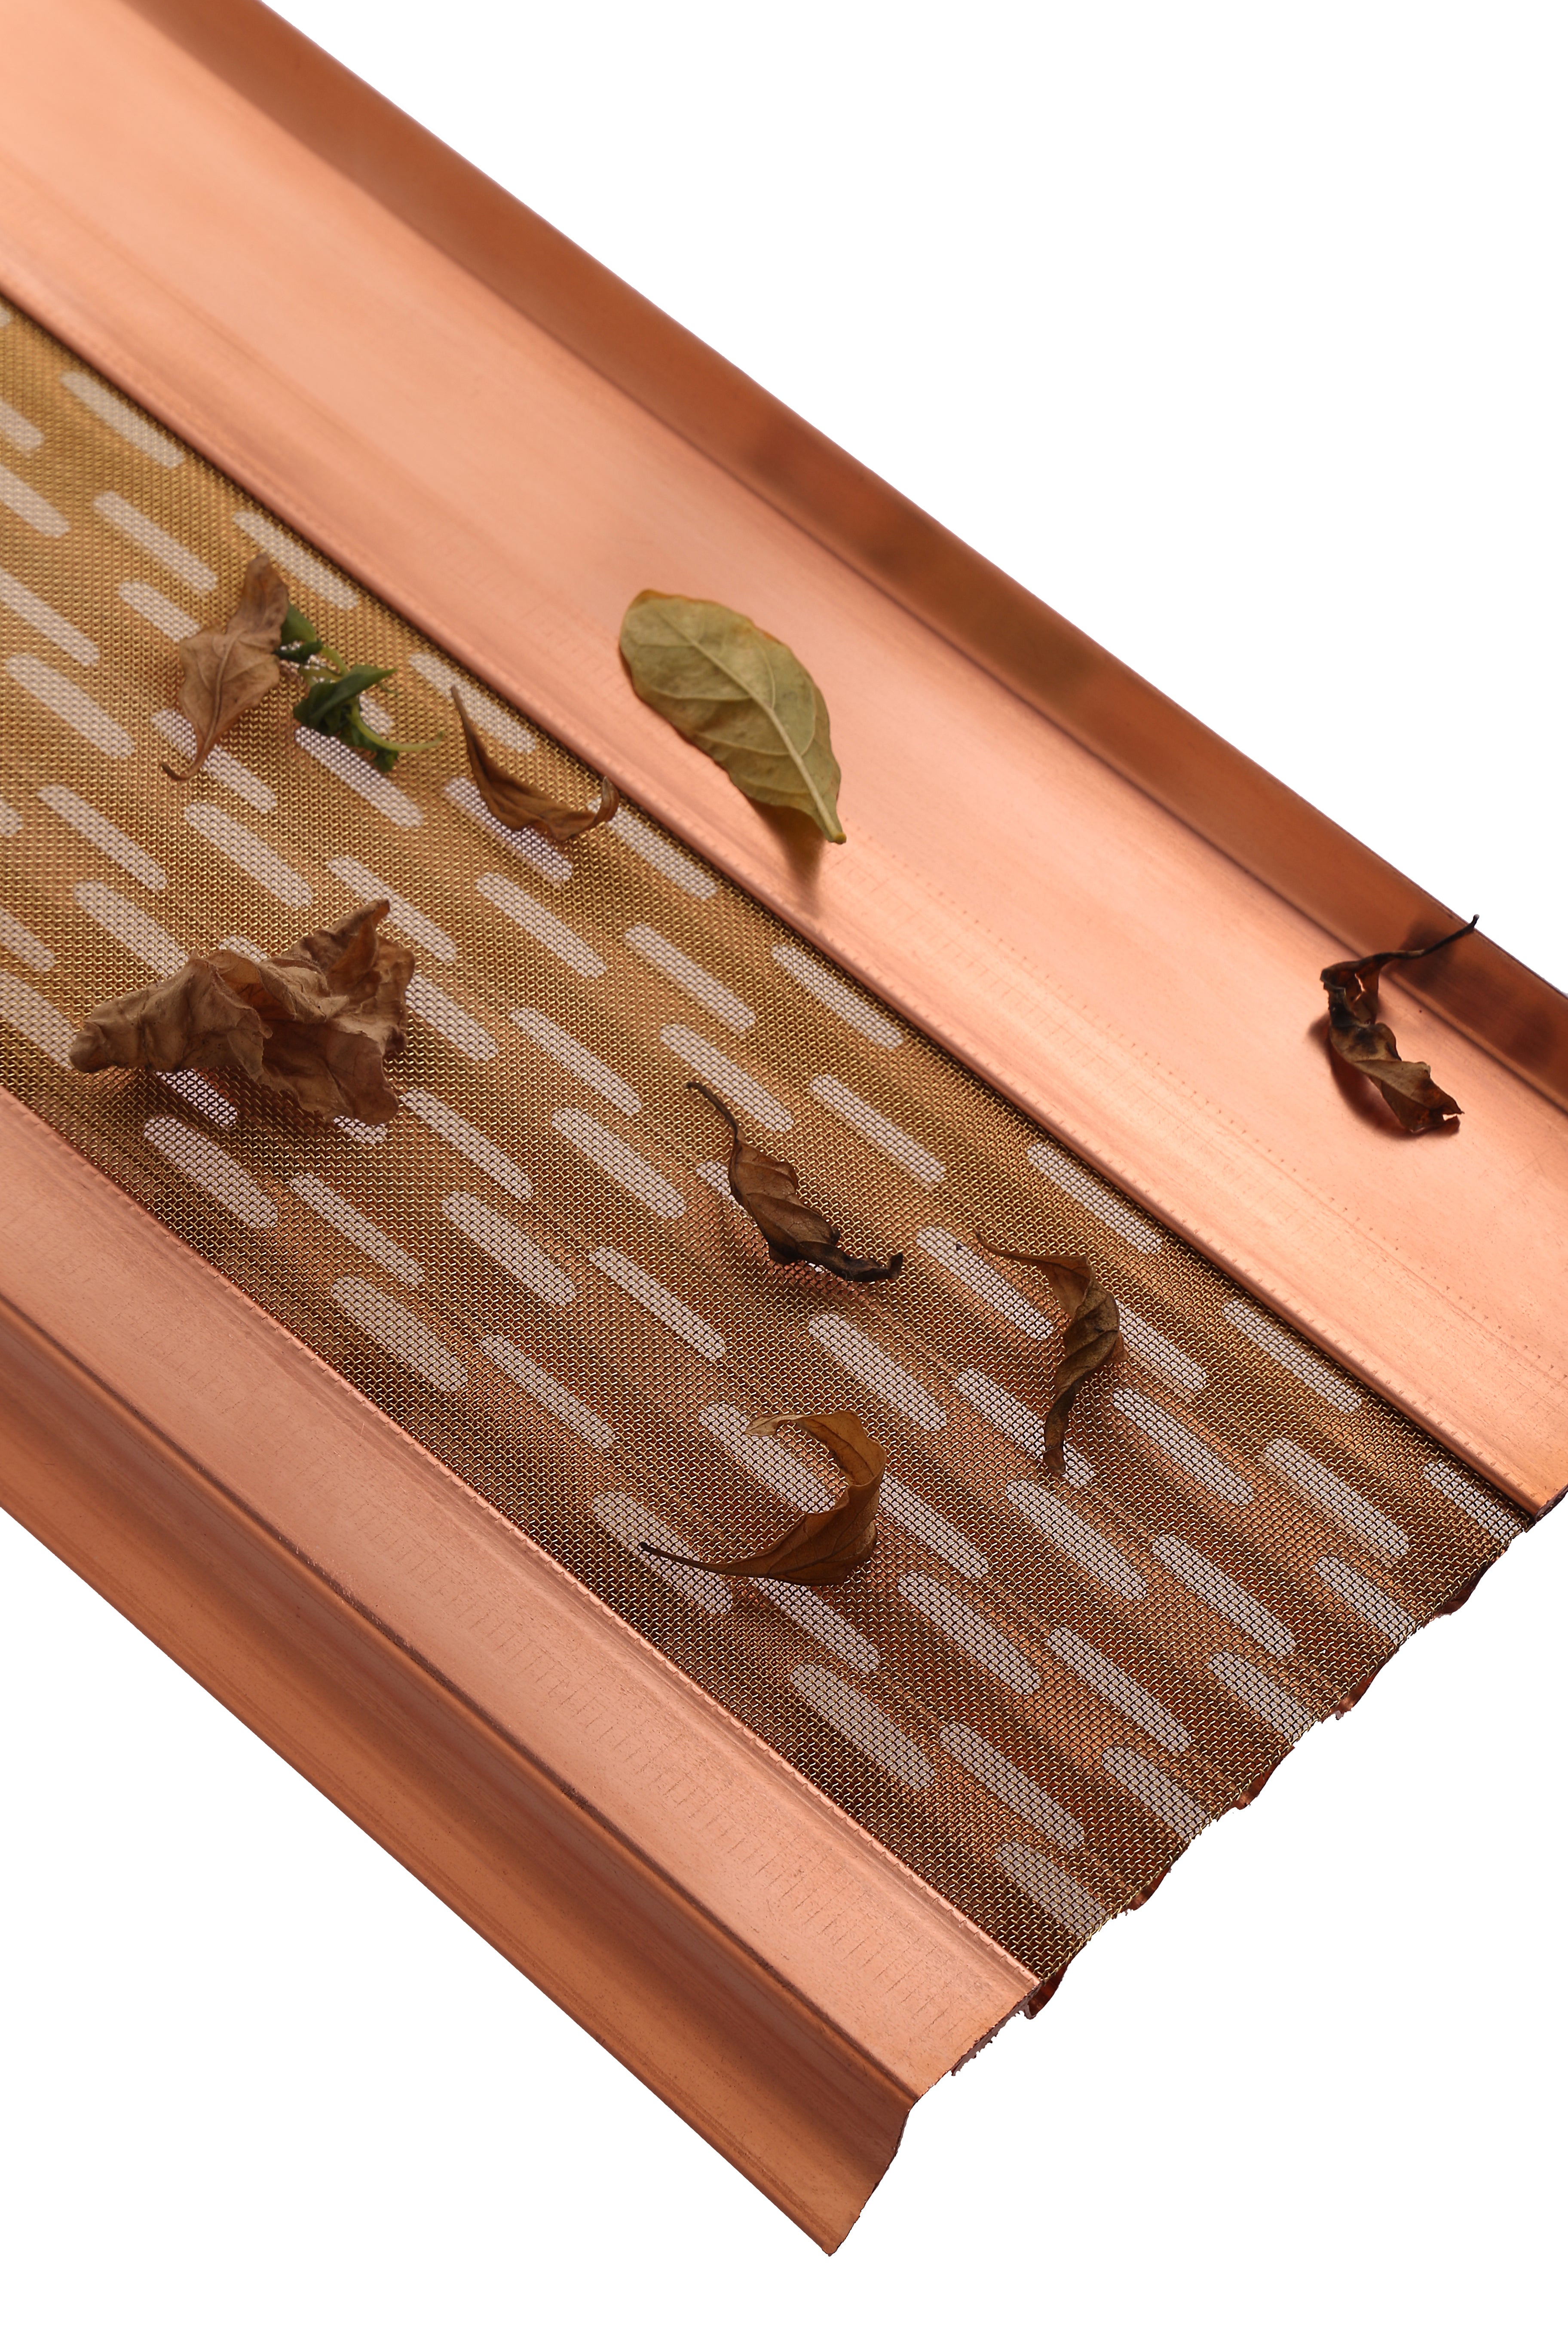 6"copper gutters. 6"k-style-Gutter,Types Styles.Gutter Guards for 6" half round copper gutter systems installed to fit top of your gutters Fully compatible with copper gutters. All Gutter Types & Styles.#1 MANUFACTURING